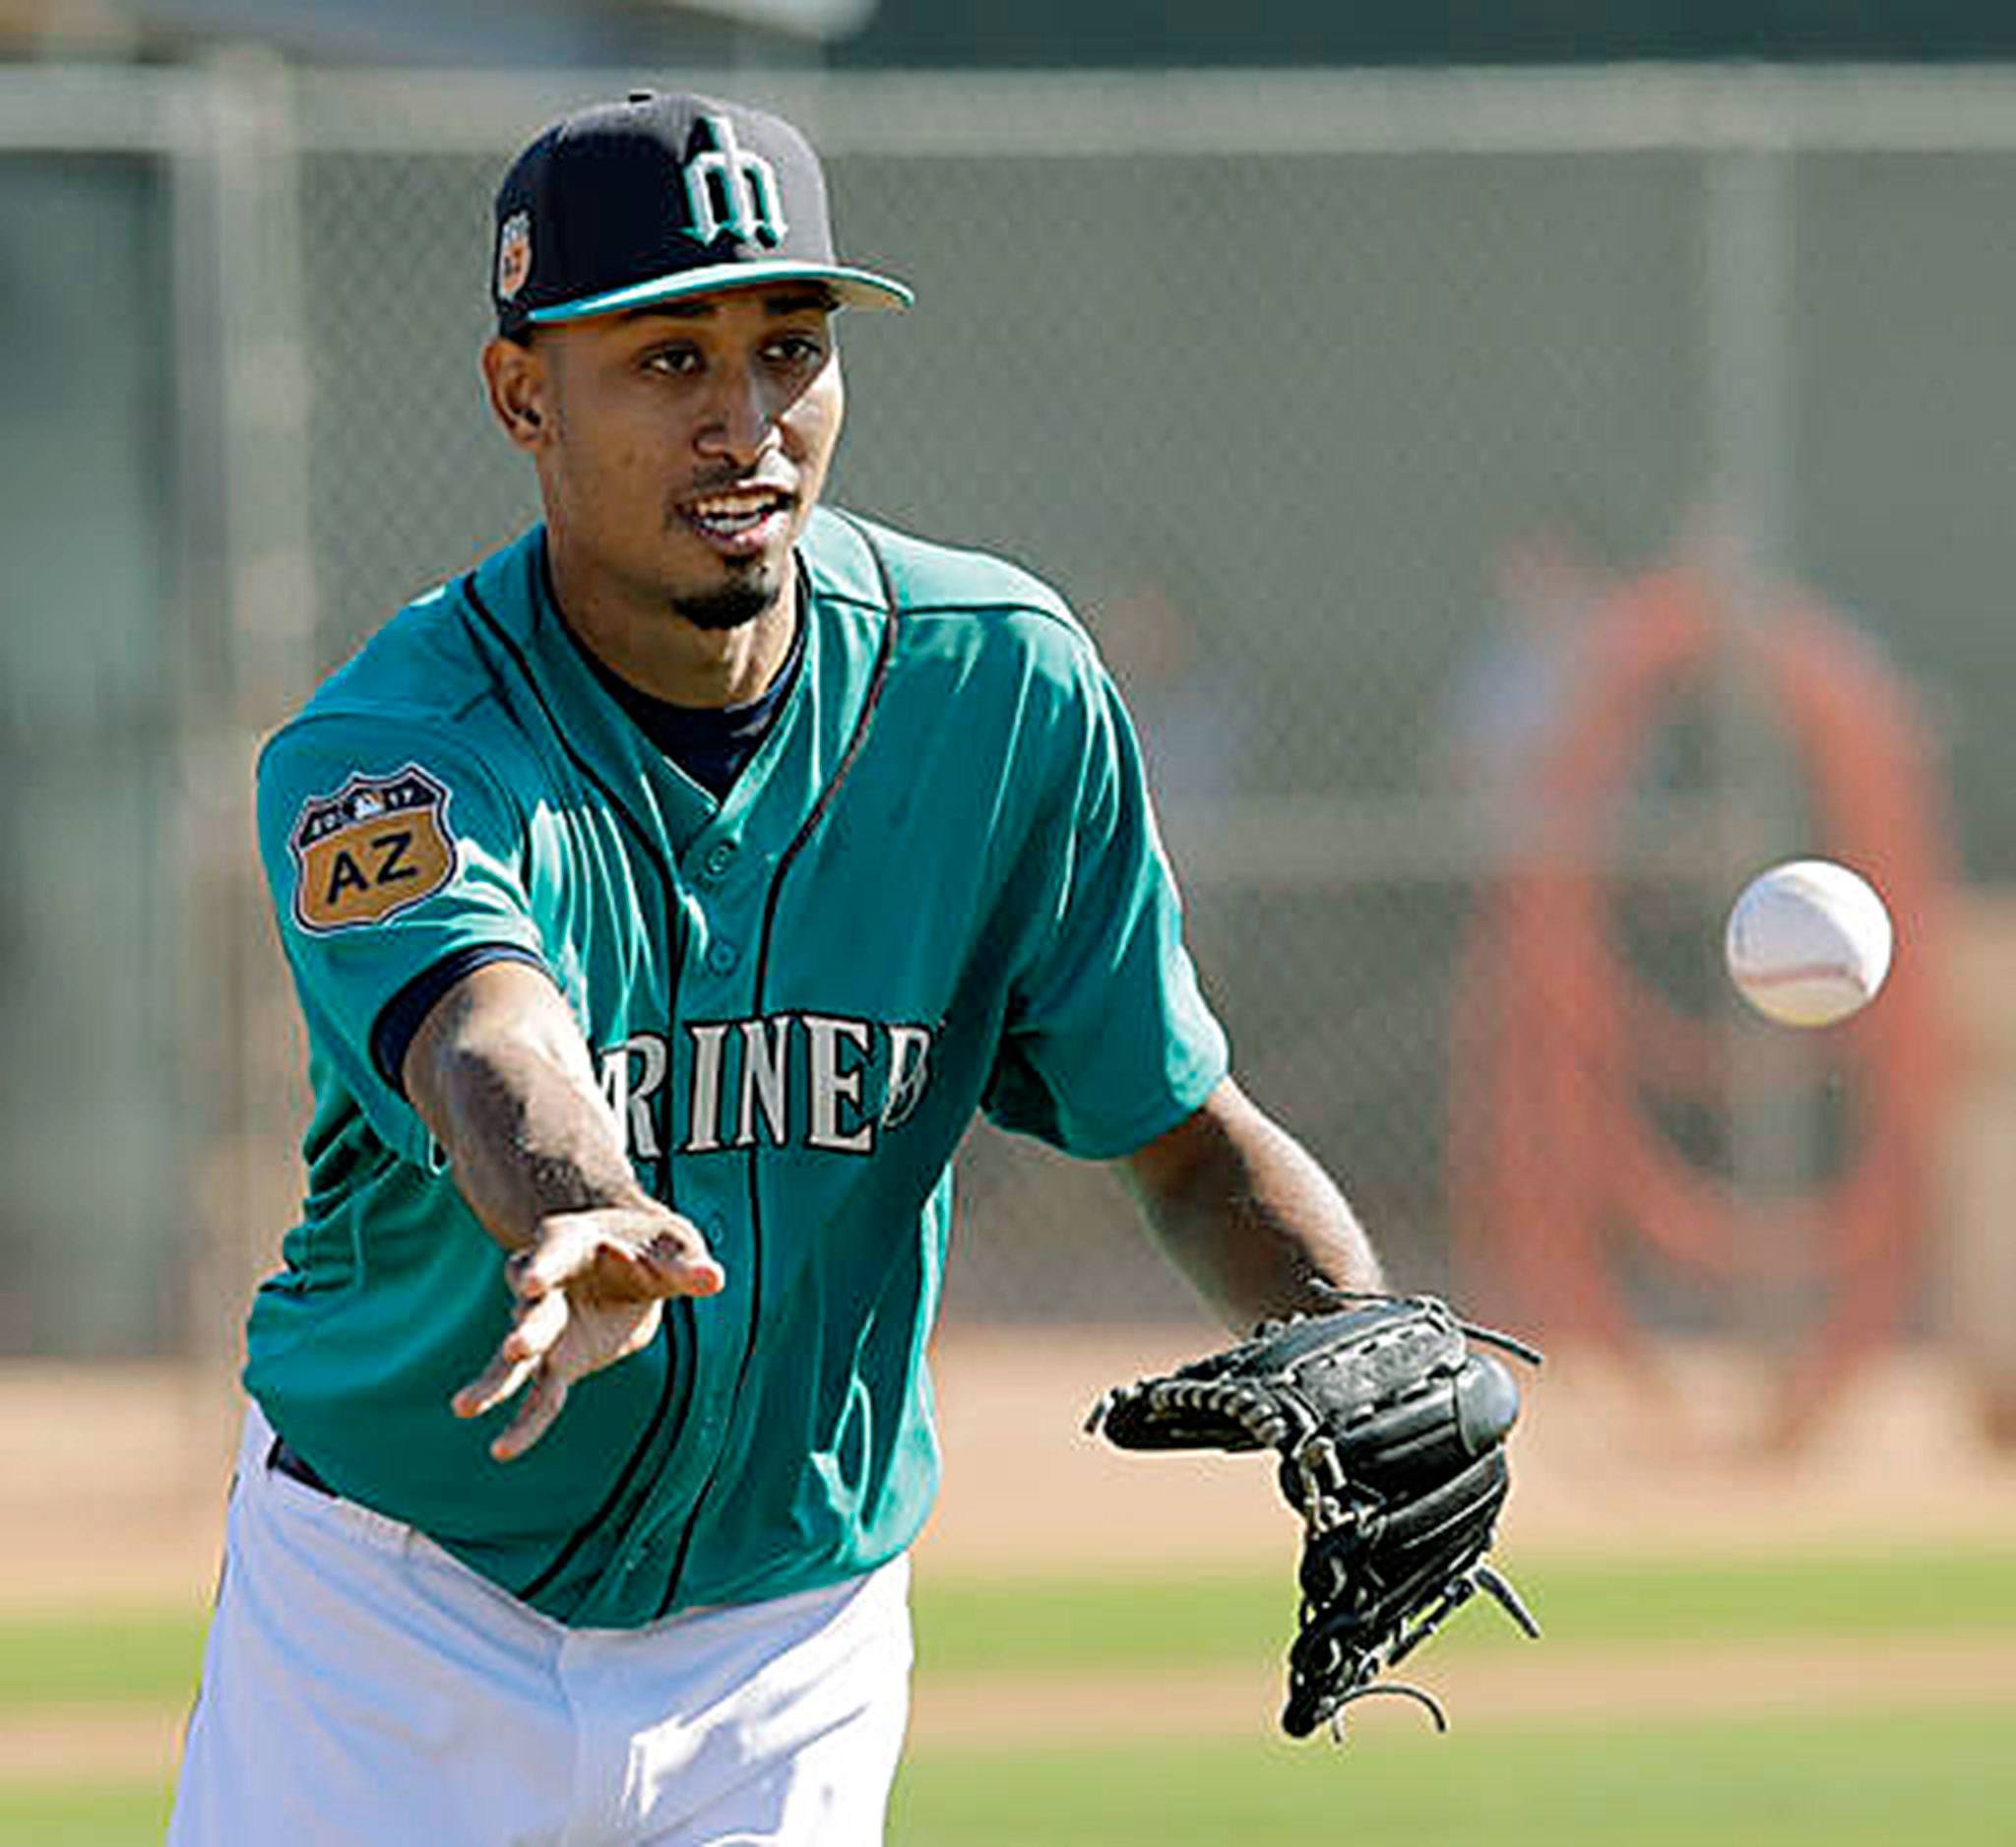 Seattle Mariners pitcher Edwin Diaz participates in a drill Wednesday at the team’s spring-training complex in Peoria, Arizona. (Charlie Riedel/Associated Press)